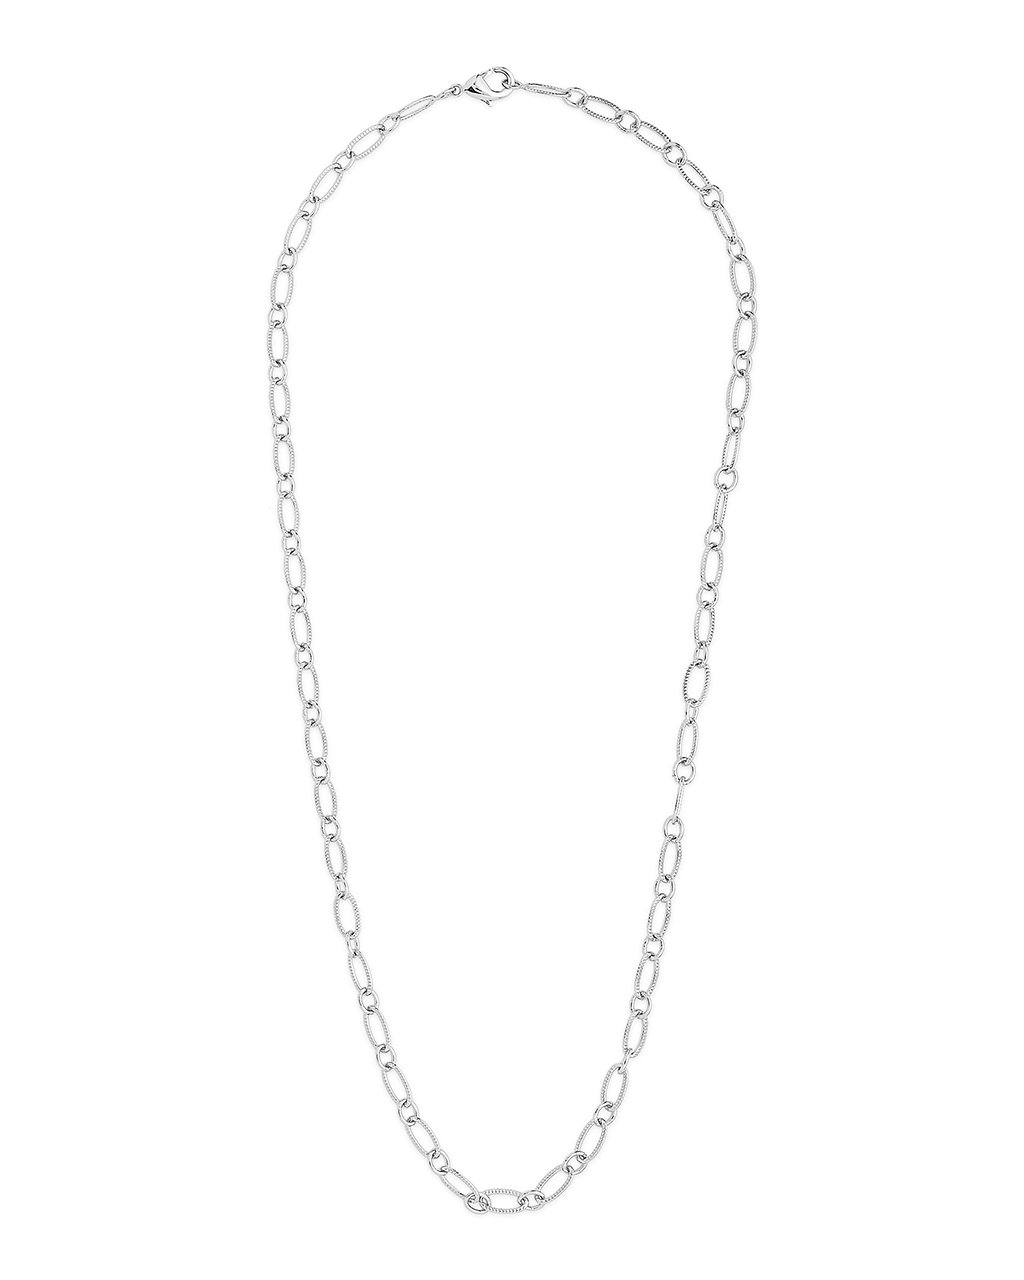 Textured Oval Link Chain Necklace Sterling Forever Silver